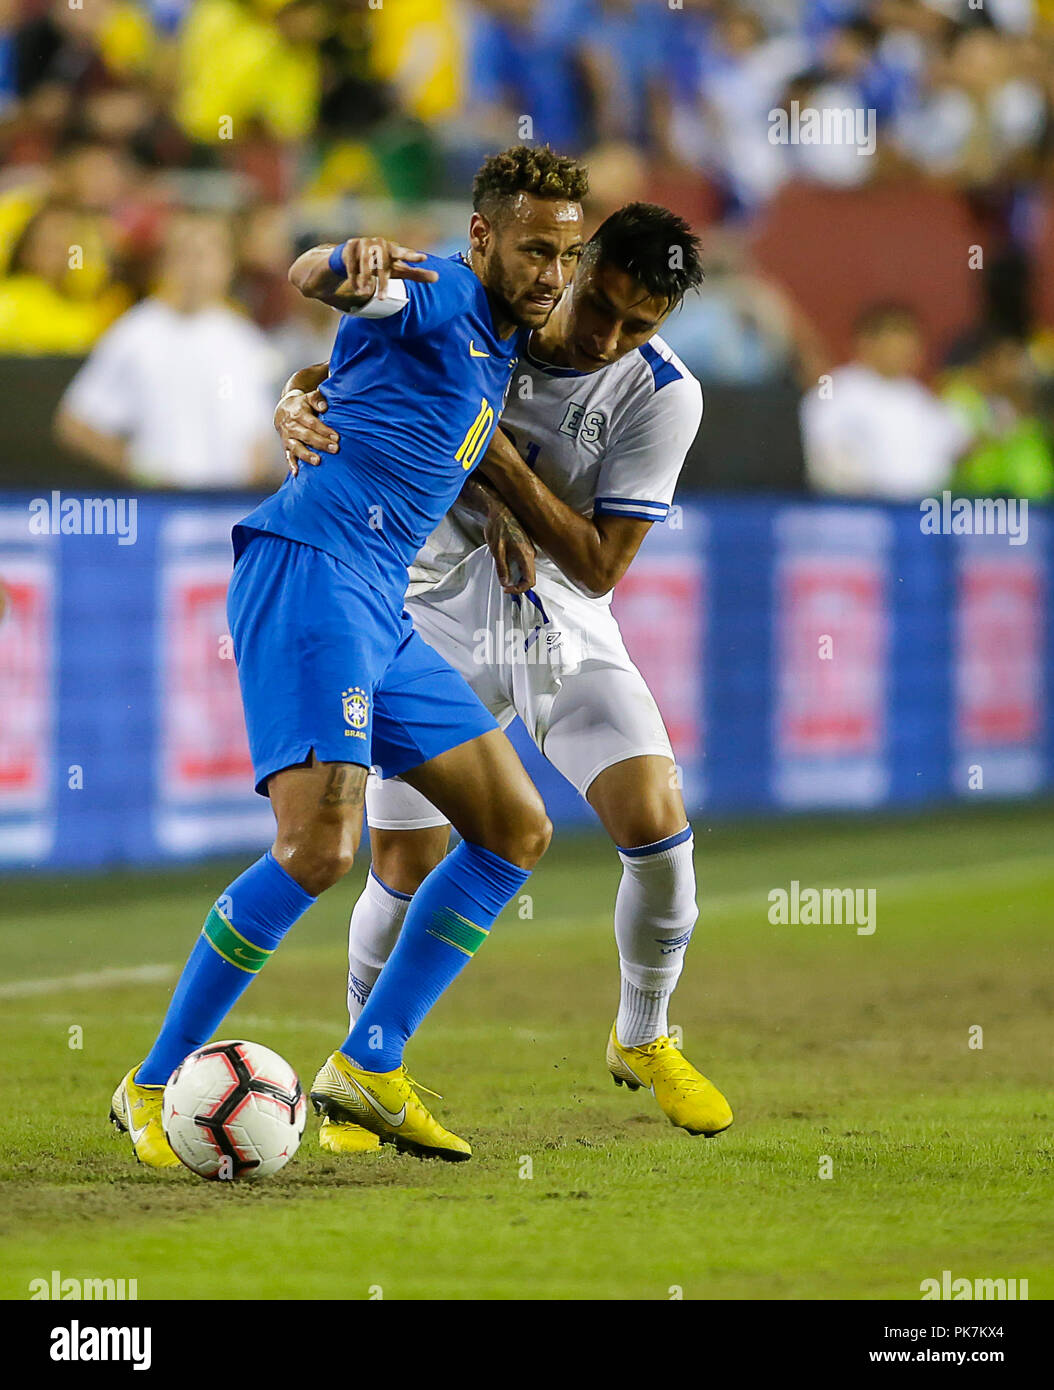 Washington DC, USA. 11th Sep, 2018. Brazil Forward #10 Neymar Jr controls the ball as he looks for a place to pass it during an International friendly soccer match between Brazil and El Salvador at Fedex Field in Washington DC. Justin Cooper/CSM/Alamy Live News Stock Photo